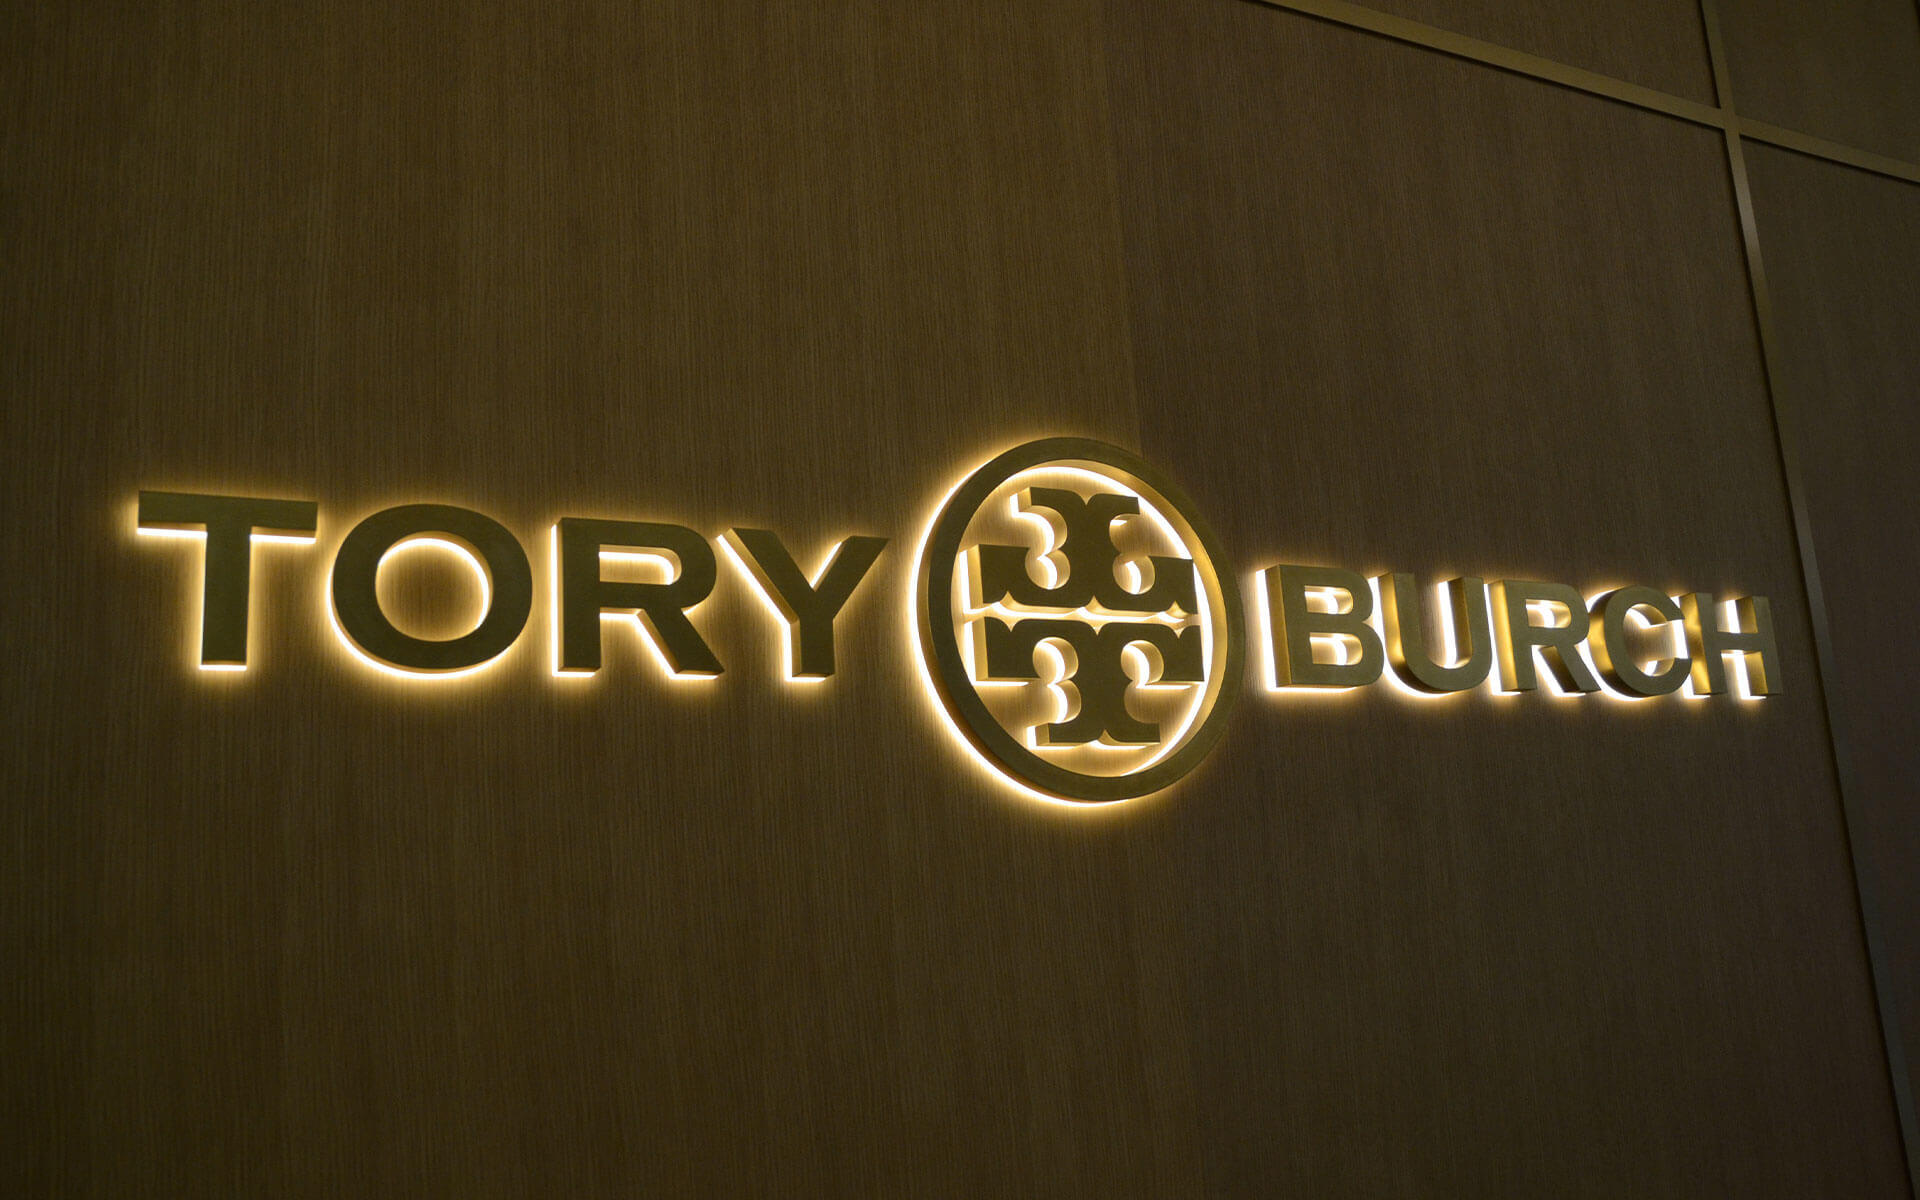 Pro Back-lit Metal Channel Letters for Tory Burch